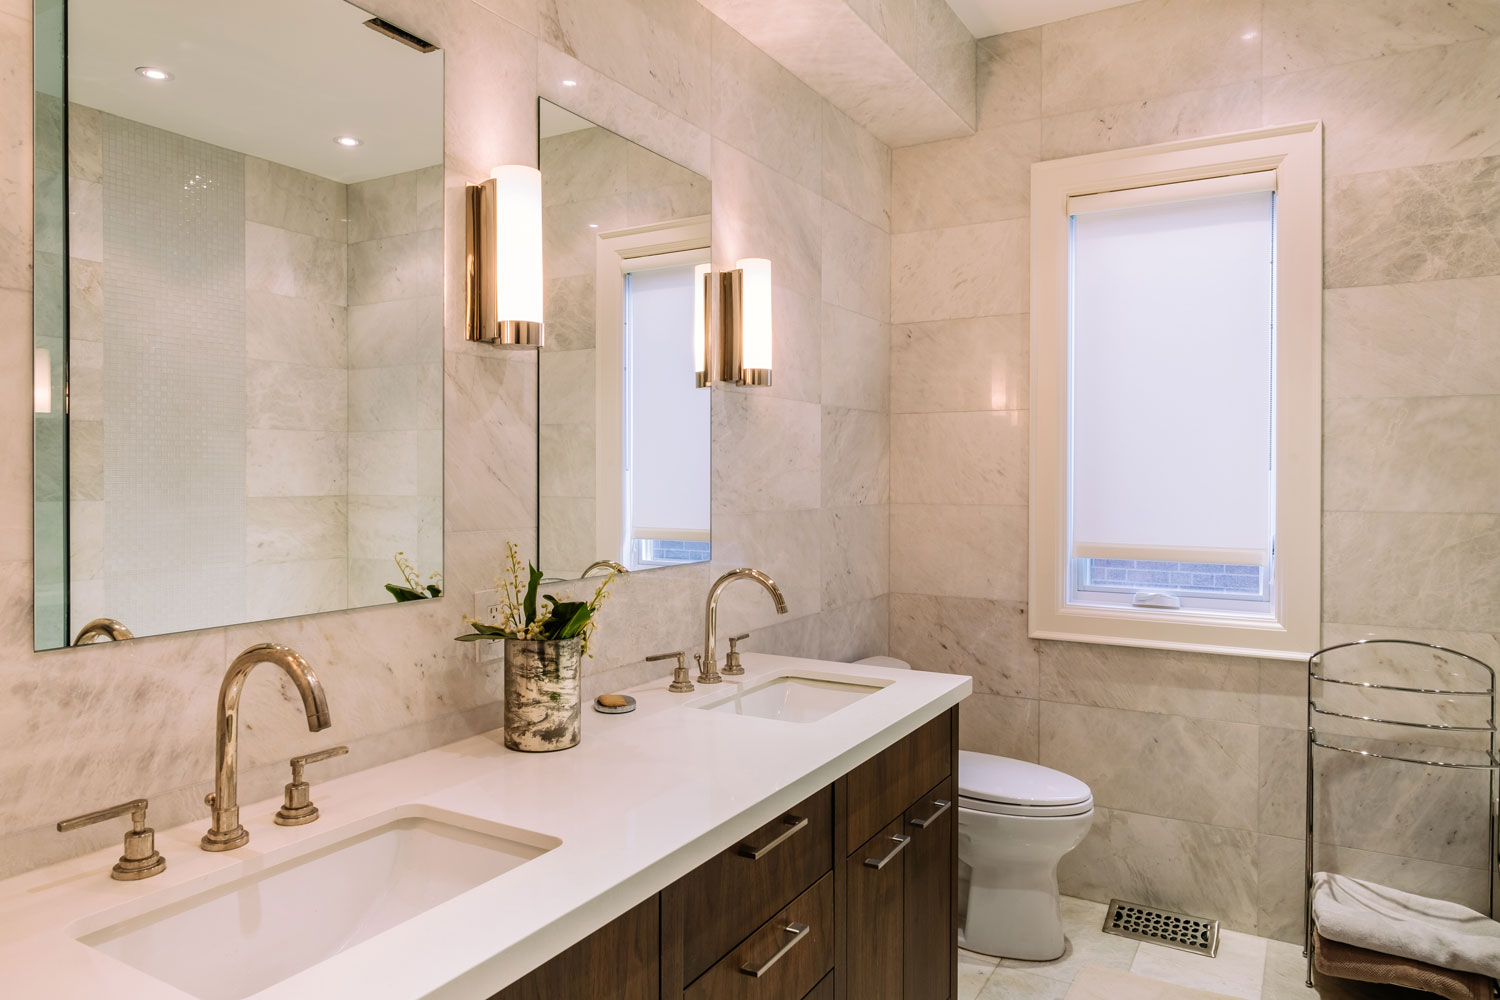 Interior of a gorgeous modern contemporary bathroom with white countertop and gold plated fixtures and wall lamps